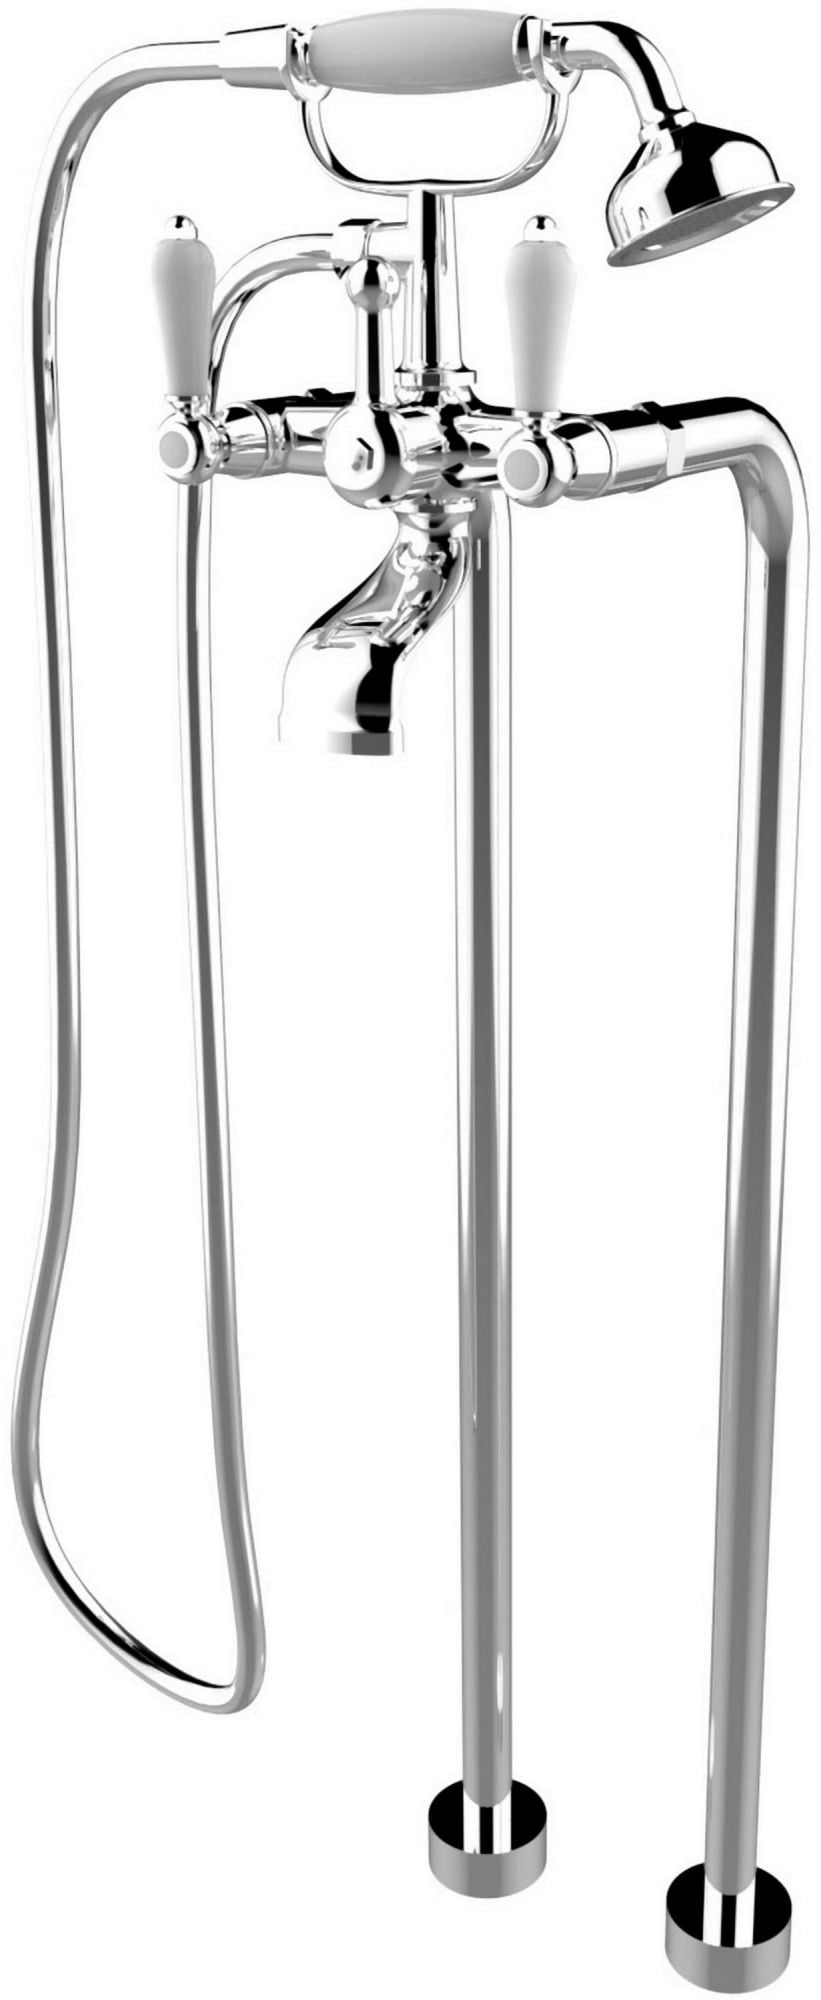 Picture of A&E Bath & Shower CPTF-02-L-CR Marseille Classical Faucet with Polished Chrome Finish